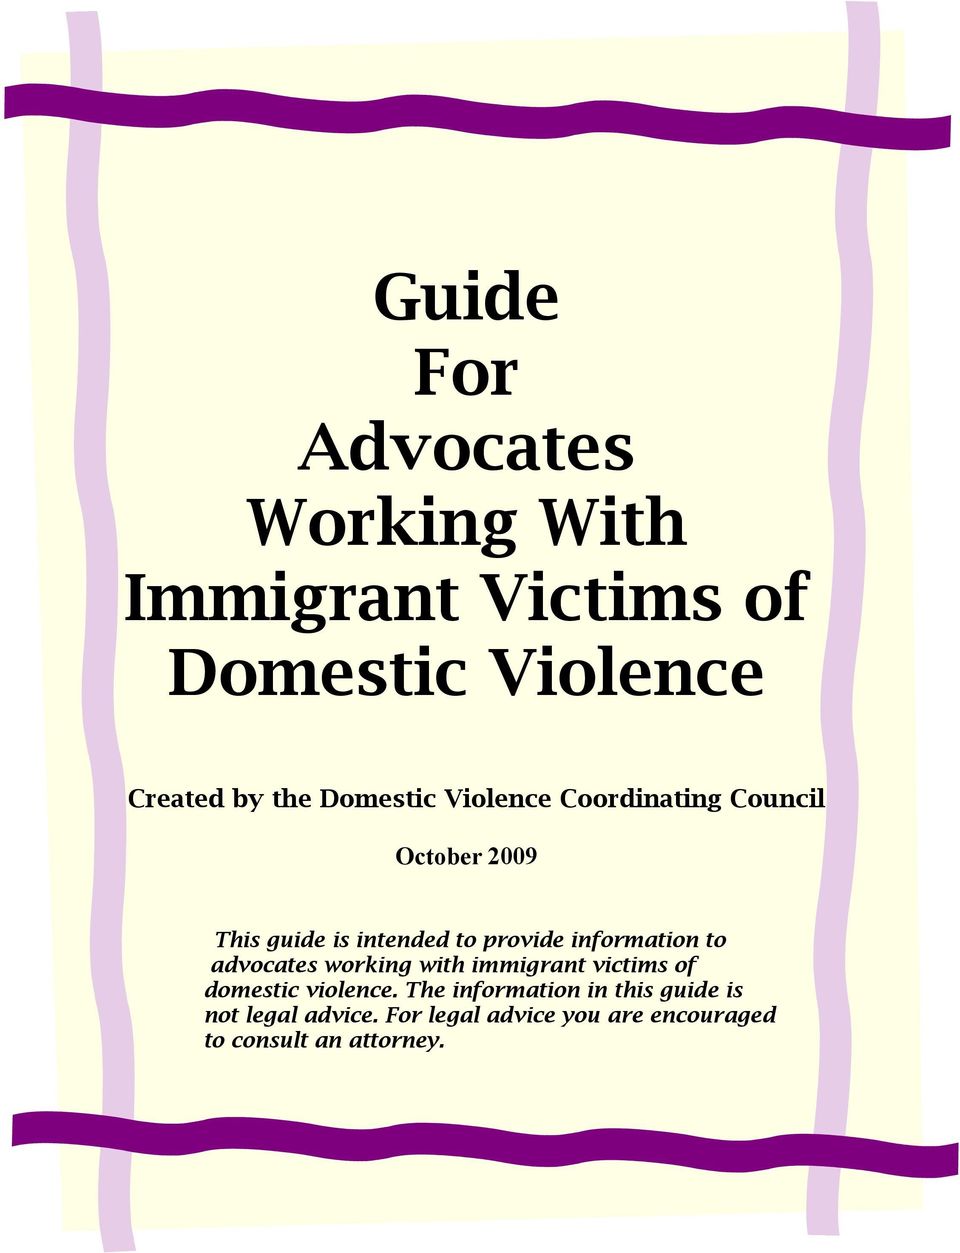 information to advocates working with immigrant victims of domestic violence.